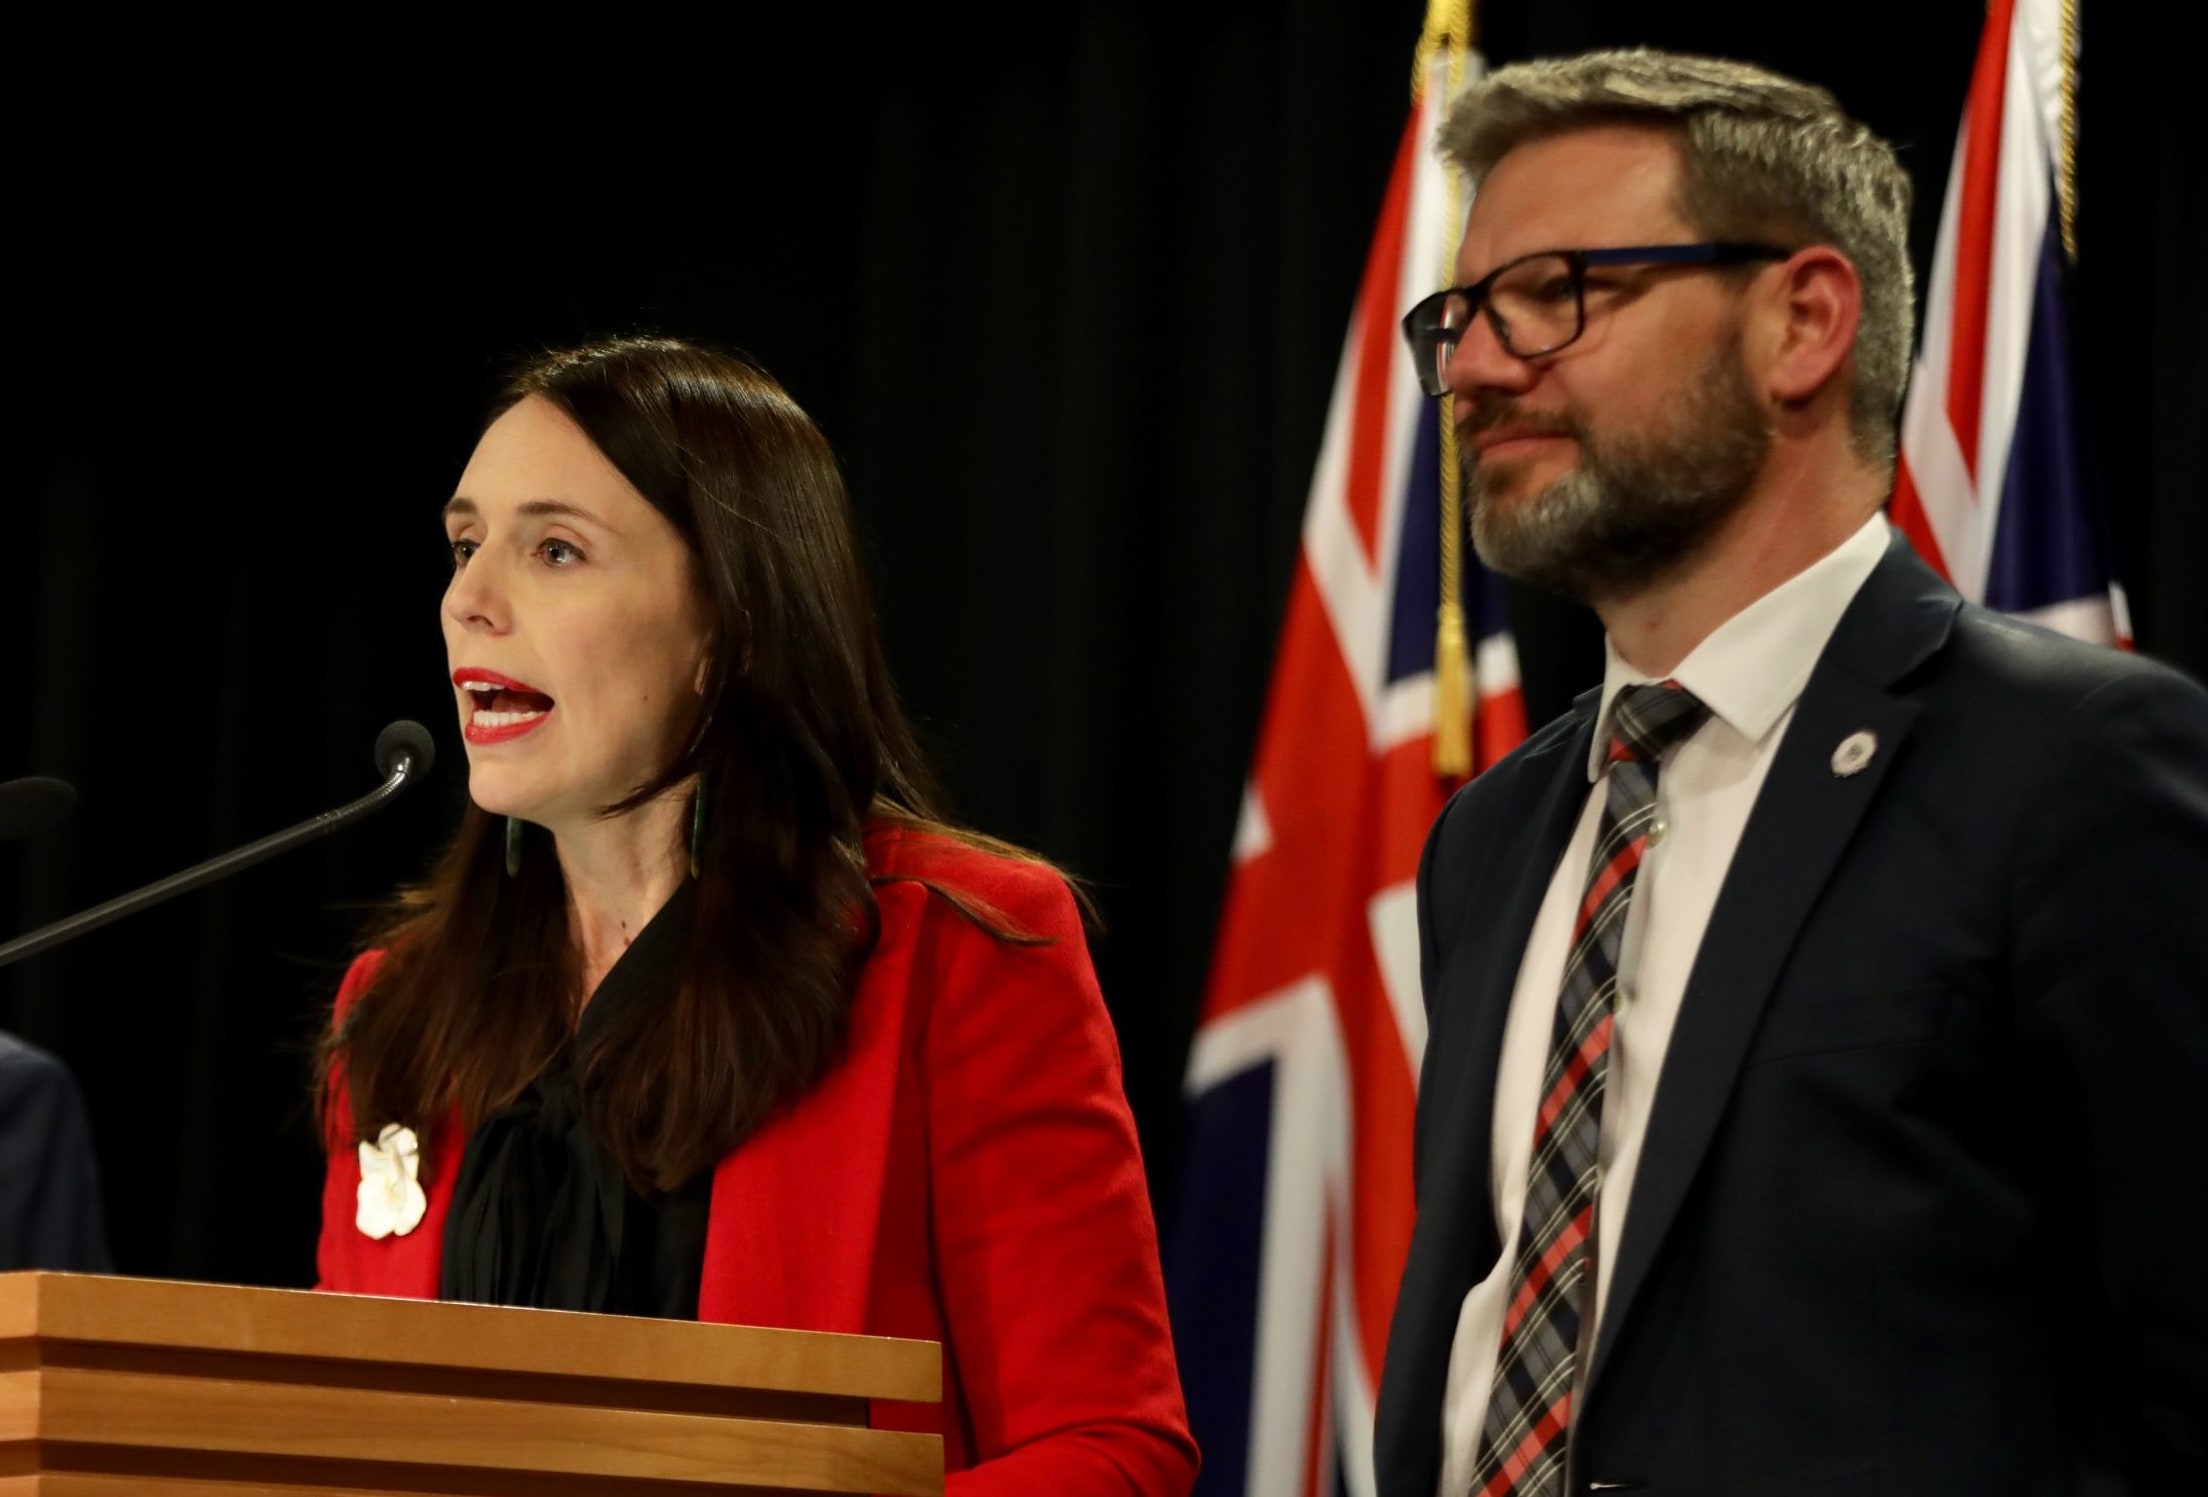 Prime Minister Jacinda Ardern - flanked by deputy PM Winston Peters and Immigration Minister Iain Lees-Galloway - announces the increase in NZ's refugee quota.